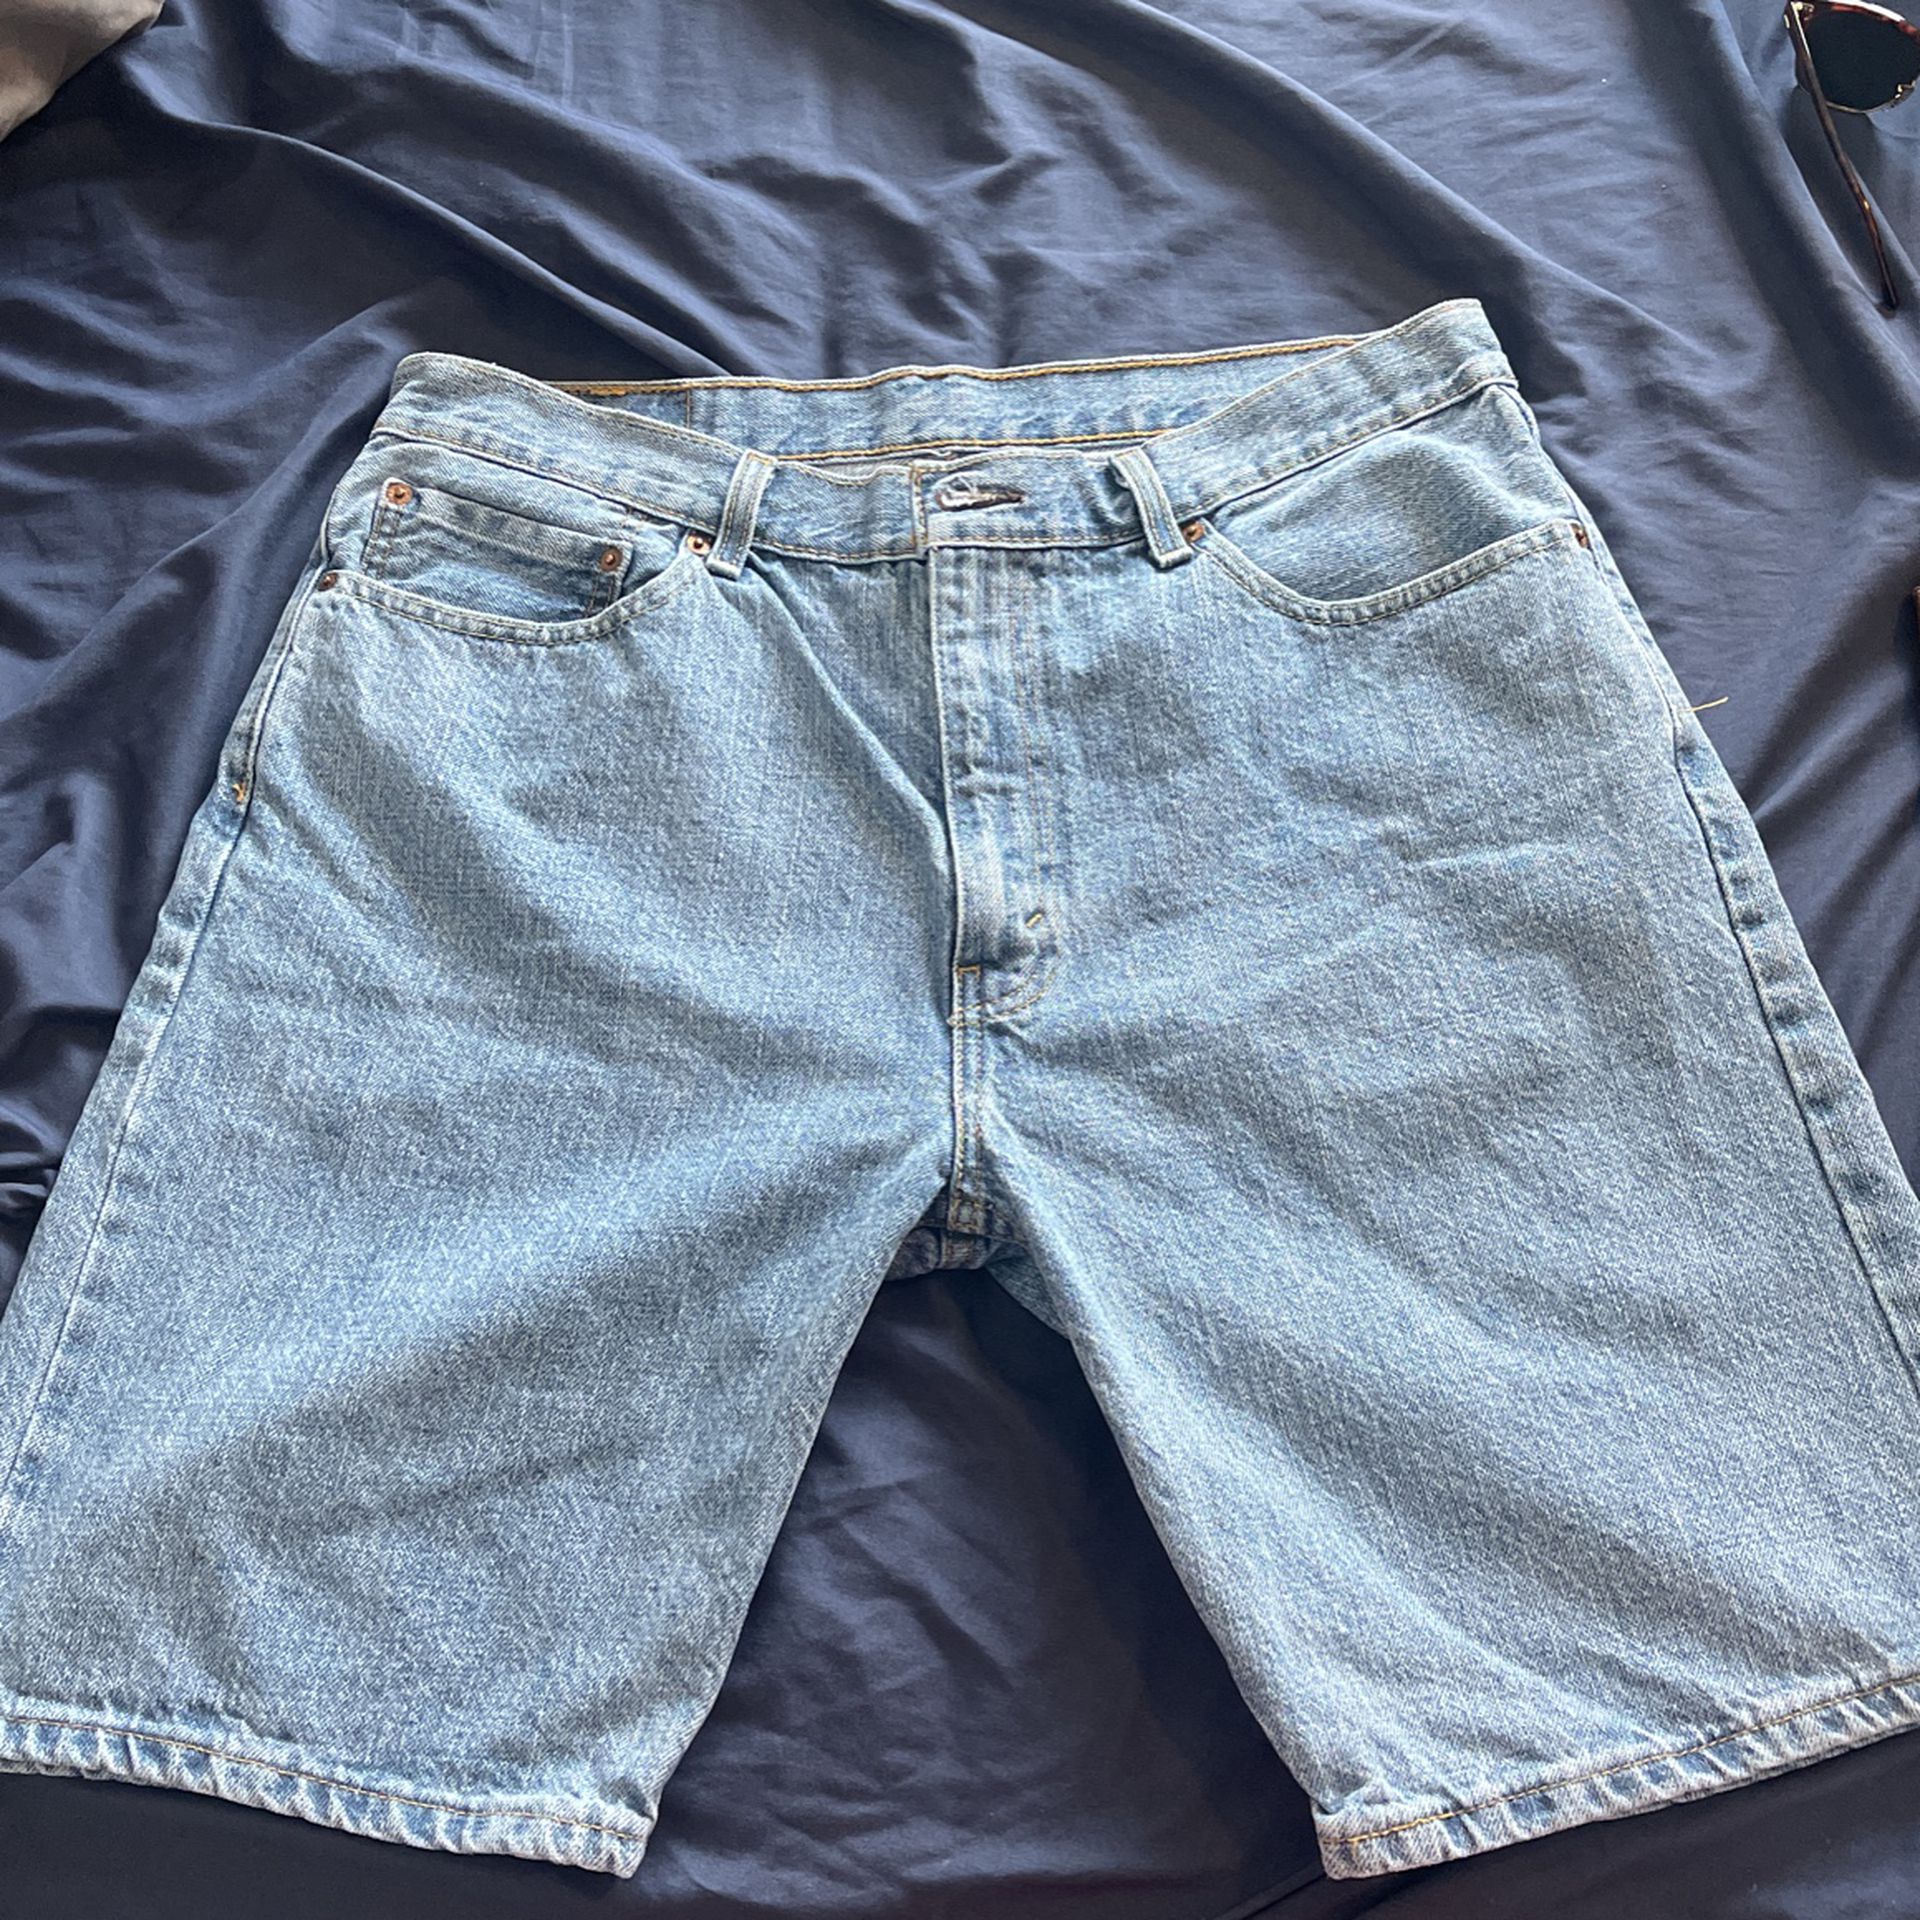 Levi's Jean Dad Shorts for Sale in San Antonio, TX - OfferUp